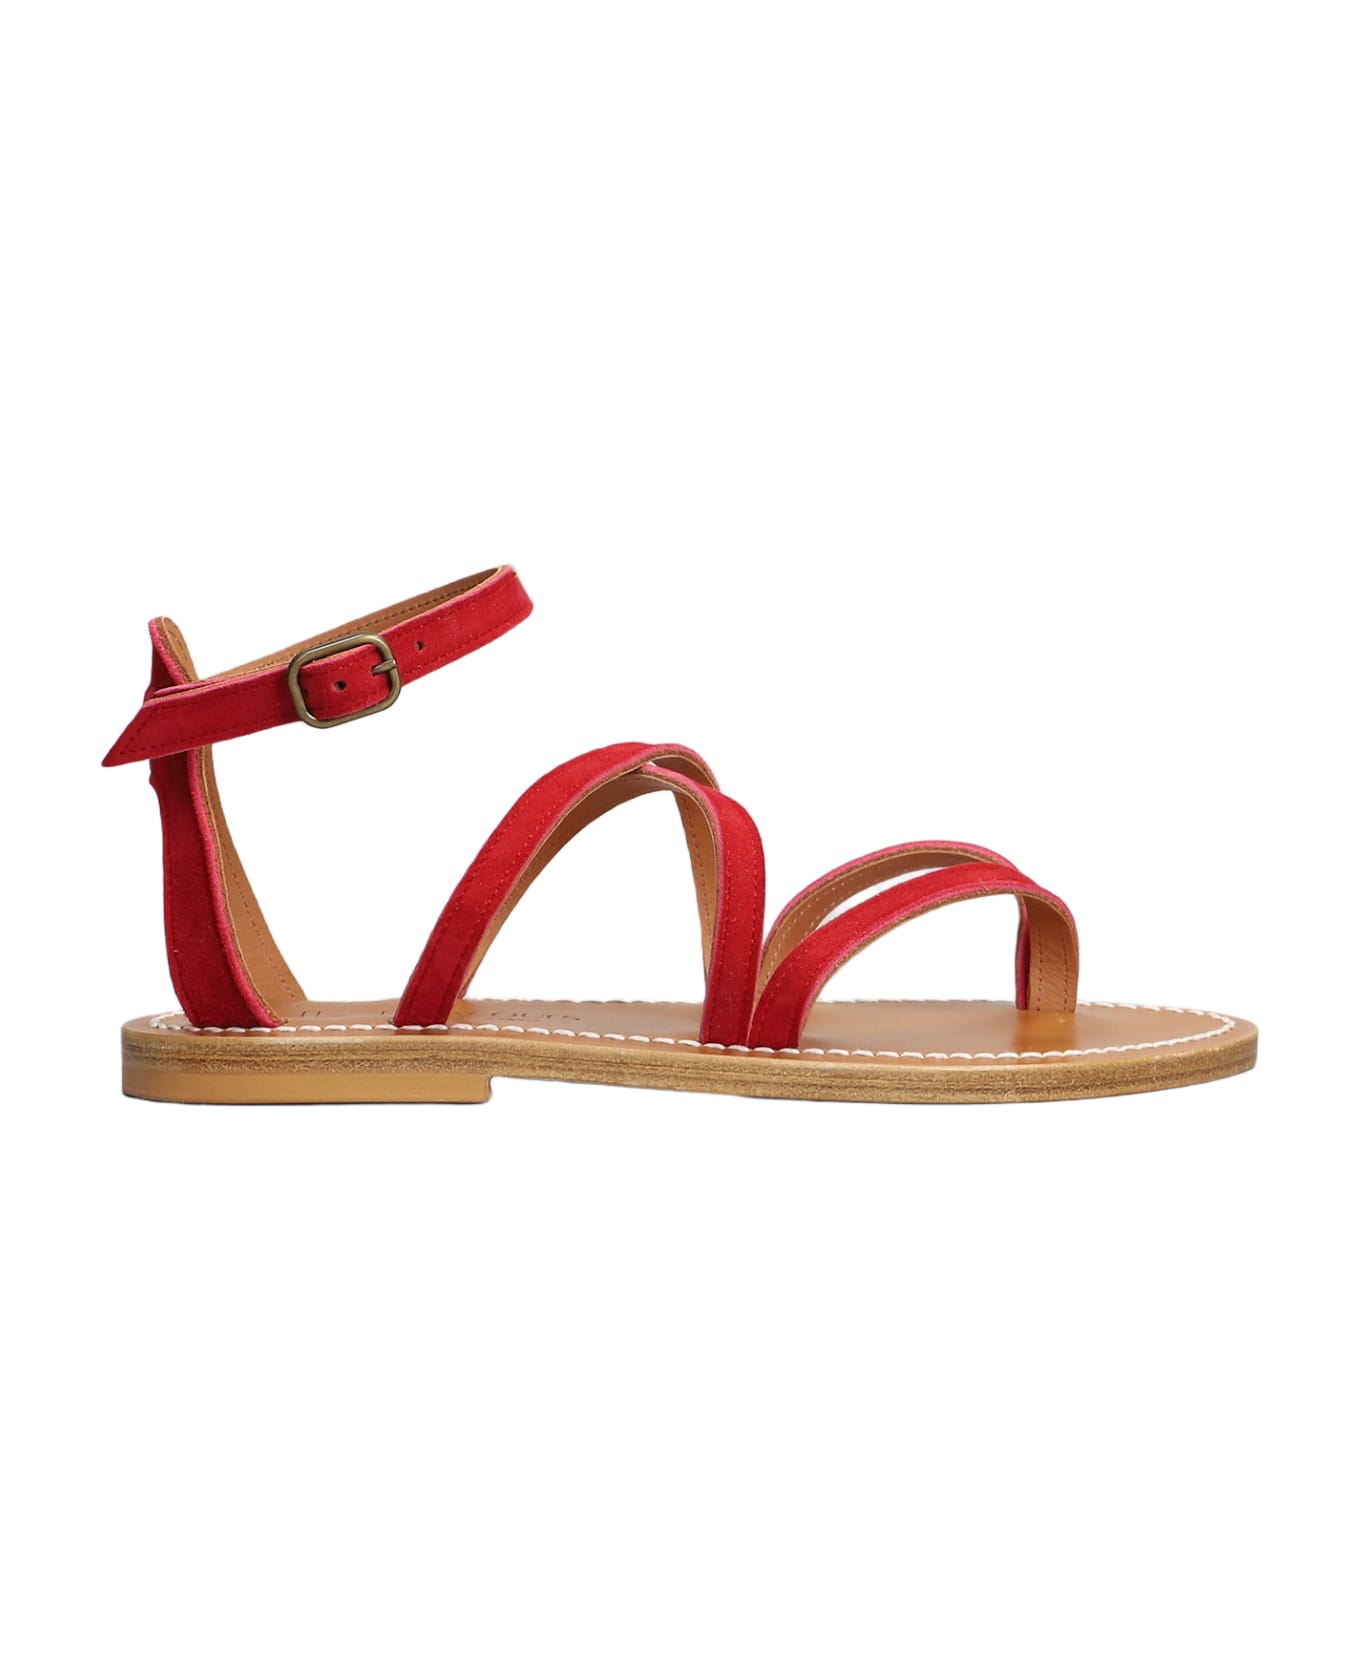 K.Jacques Epicure F Flats In Fuxia Suede - fuxia